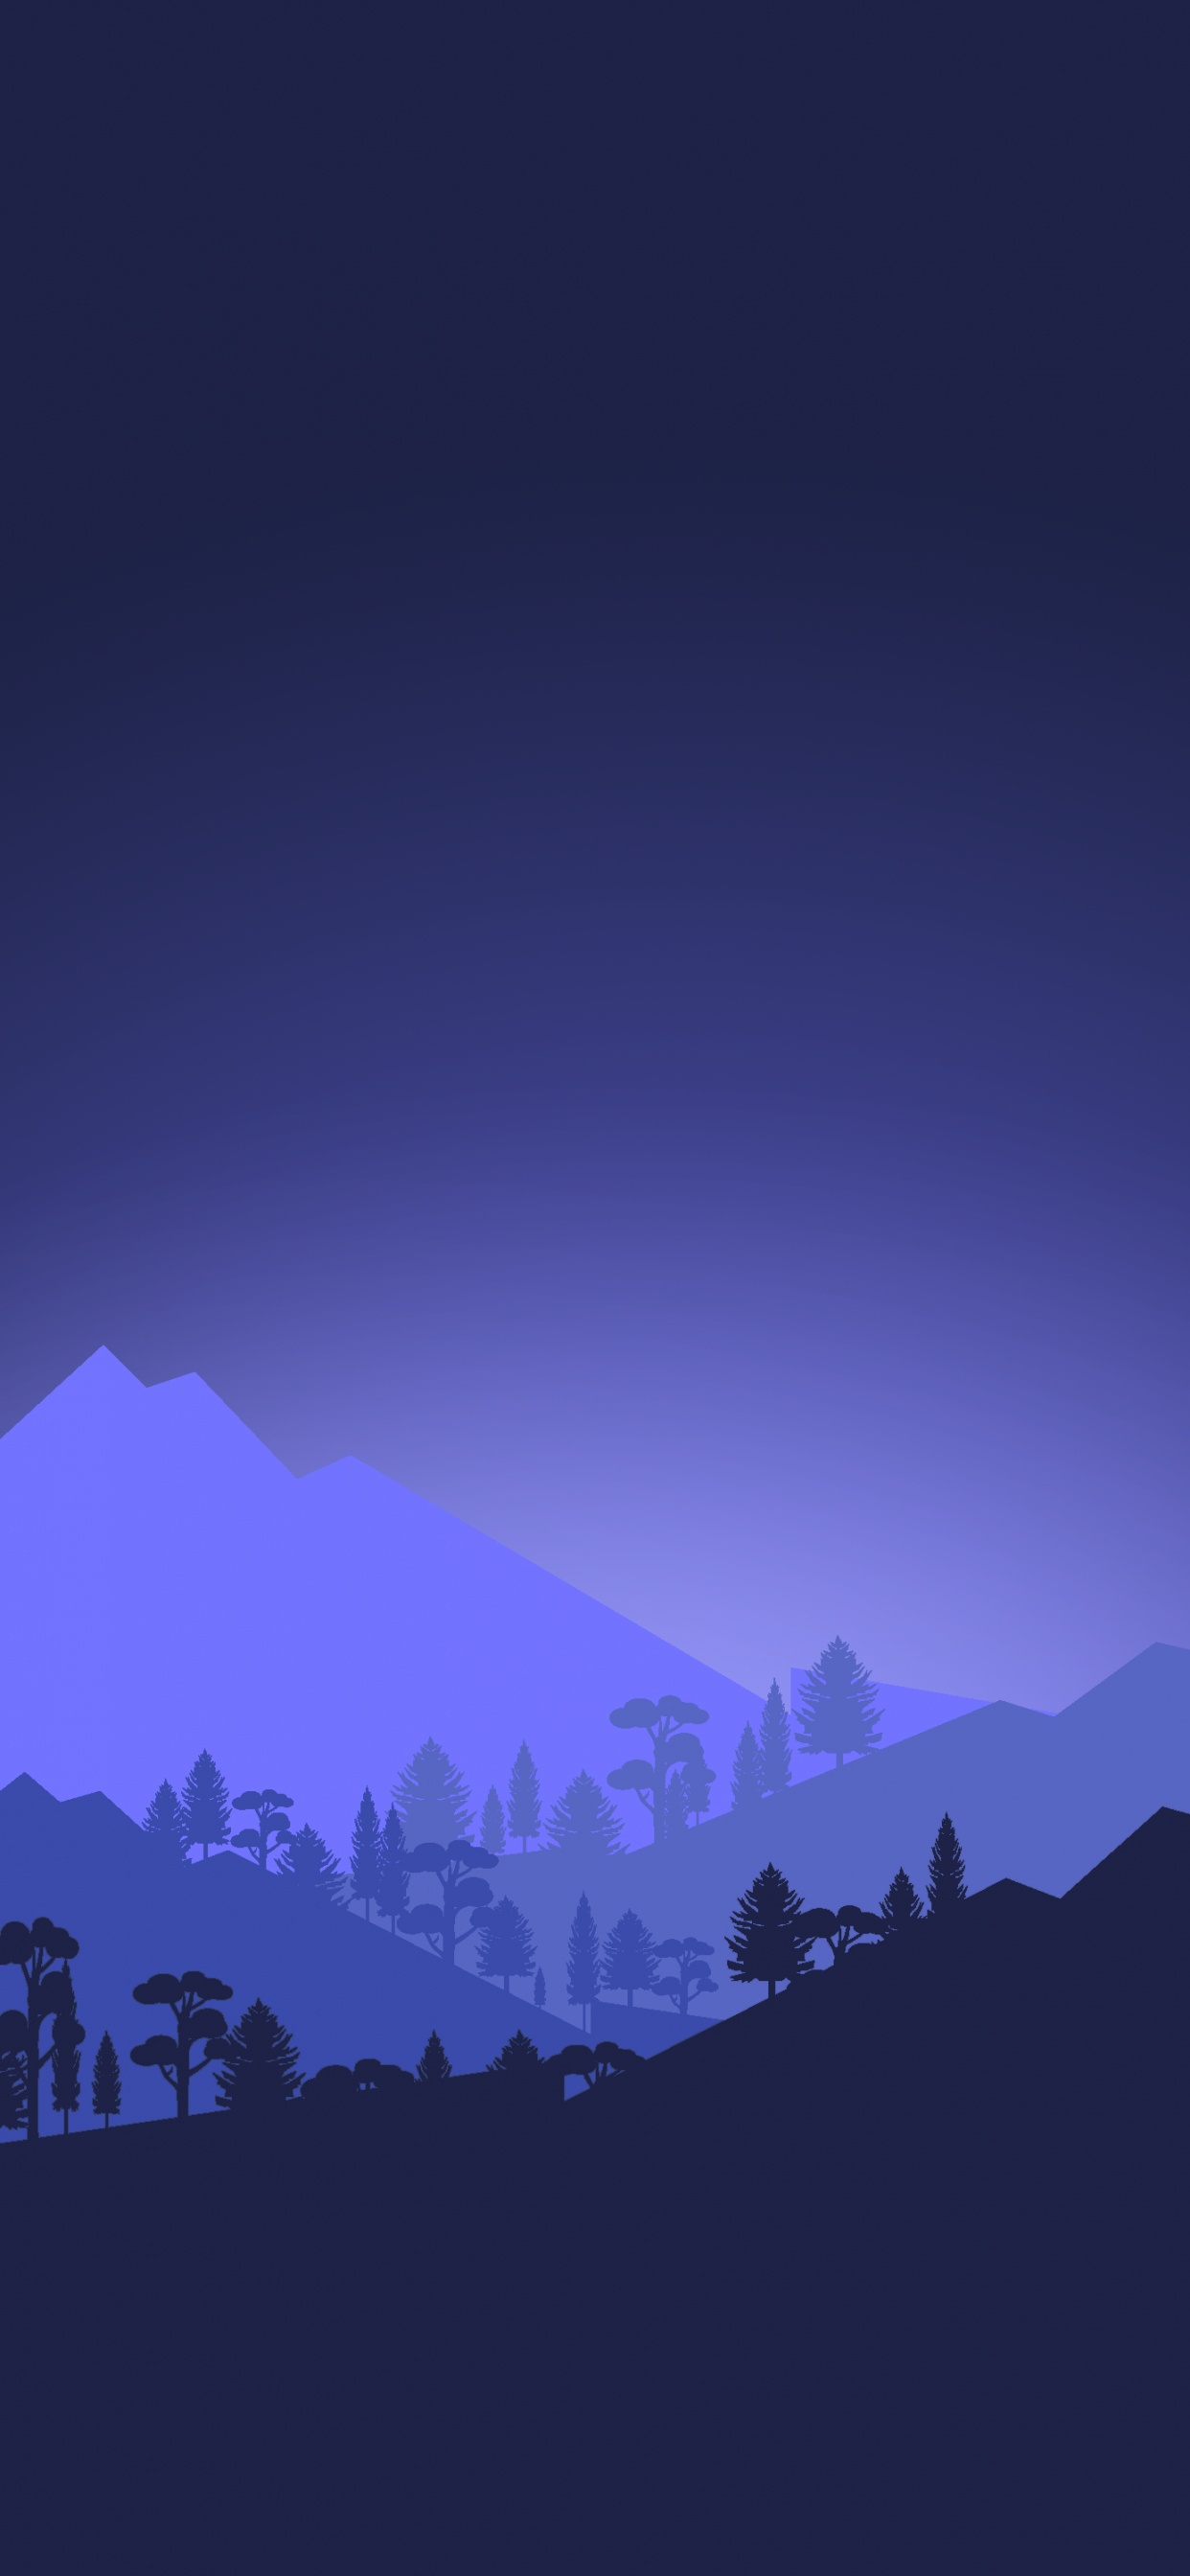 Ios, Smartphone, Apples, Mountain, Atmosphere. Wallpaper in 1242x2688 Resolution